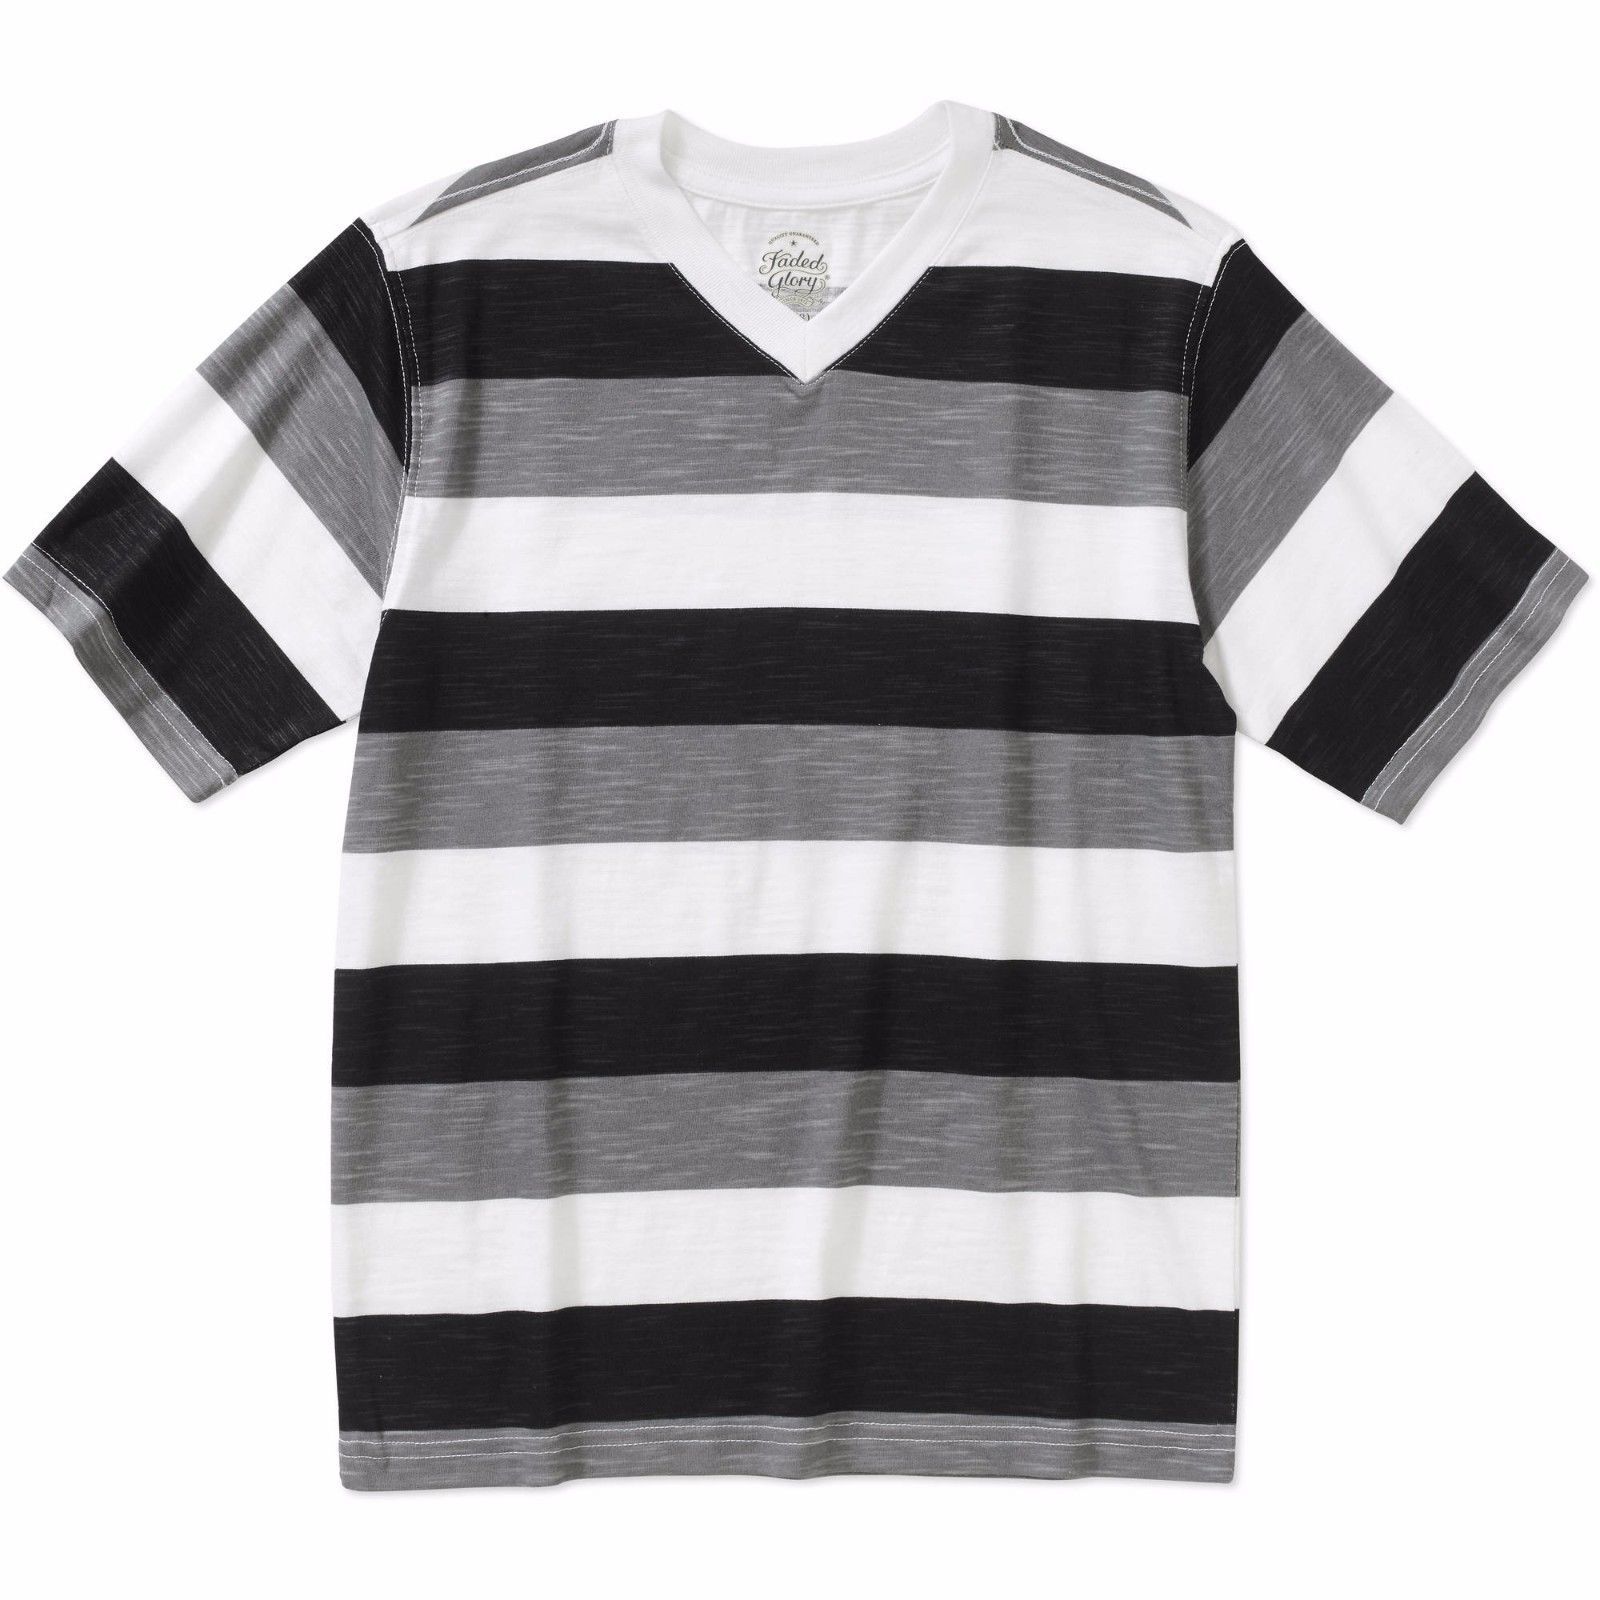 Faded Glory Boys Short Sleeve Rugby V Neck T Shirt Black Soot Size X-LARGE 14-16 - $8.90